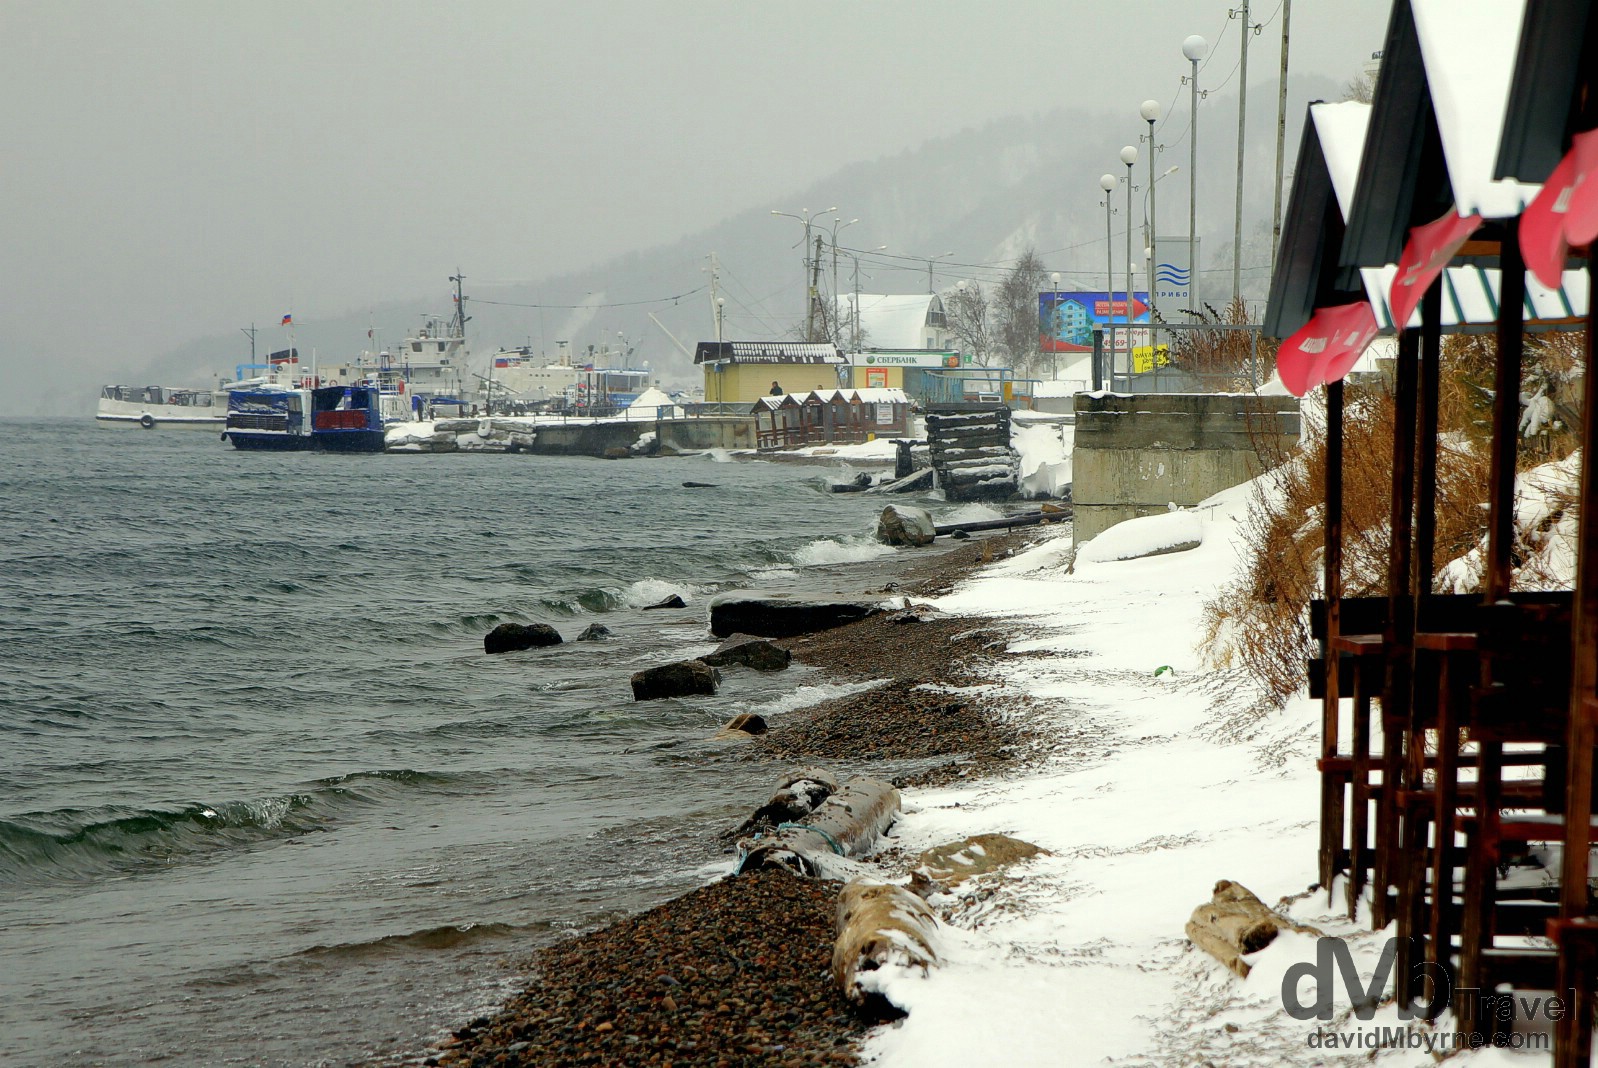  A wintry day on the shores of Lake Baikal from the village of Listvyanka, Irkutsk Oblat, Russia. November 9th 2012.